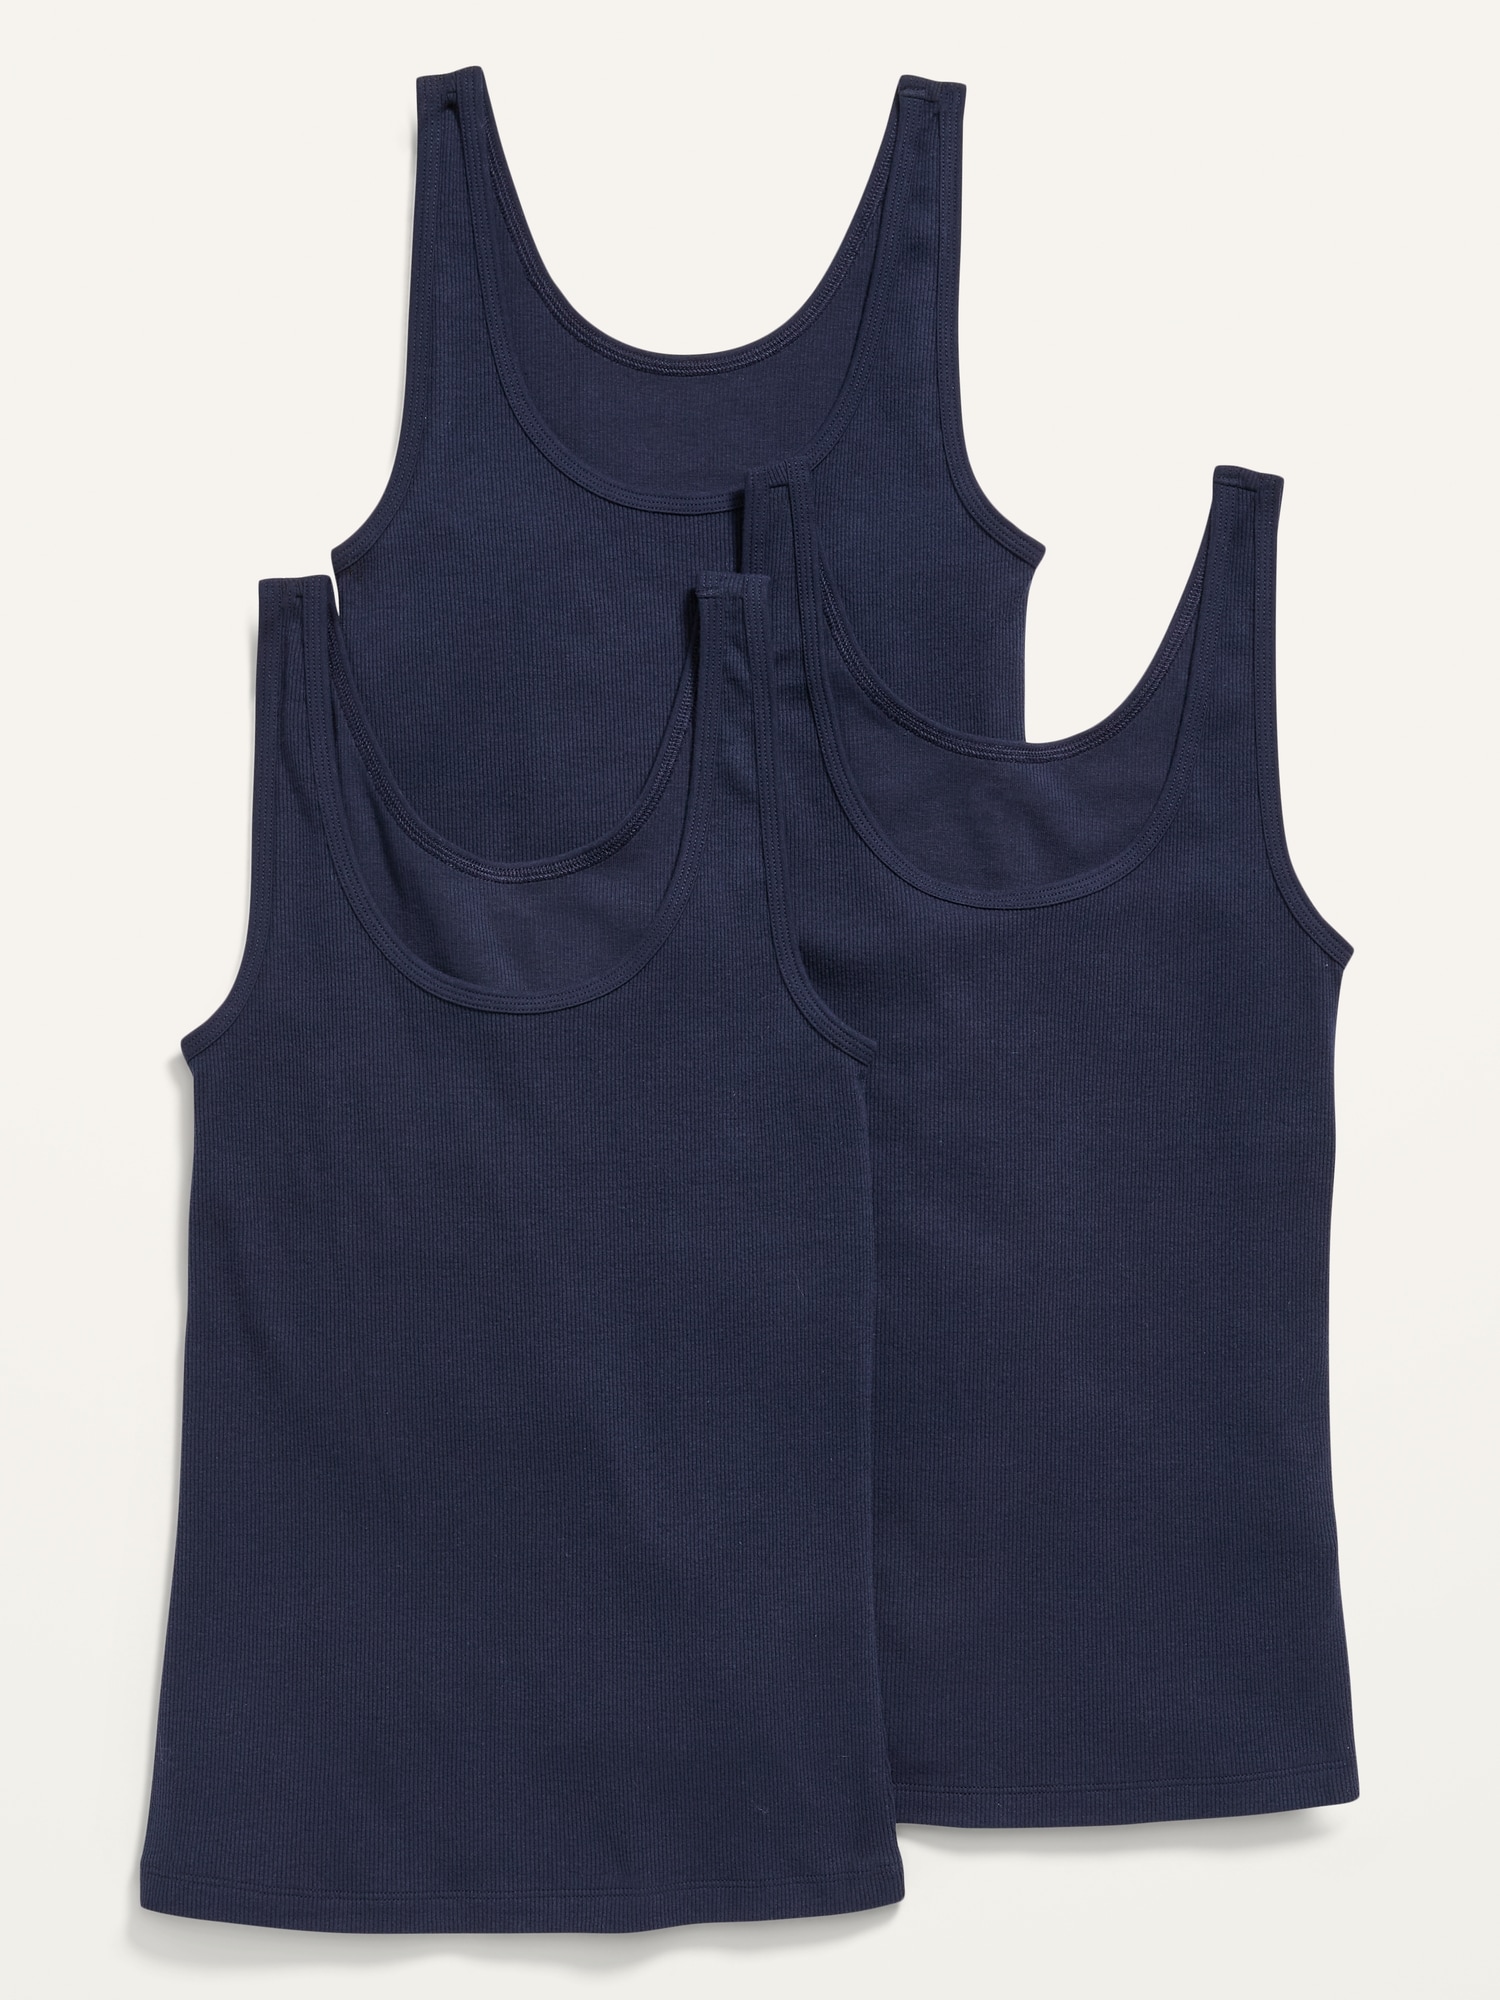 Women's Slim Fit Tank Top - A New Day™ Navy Blue M